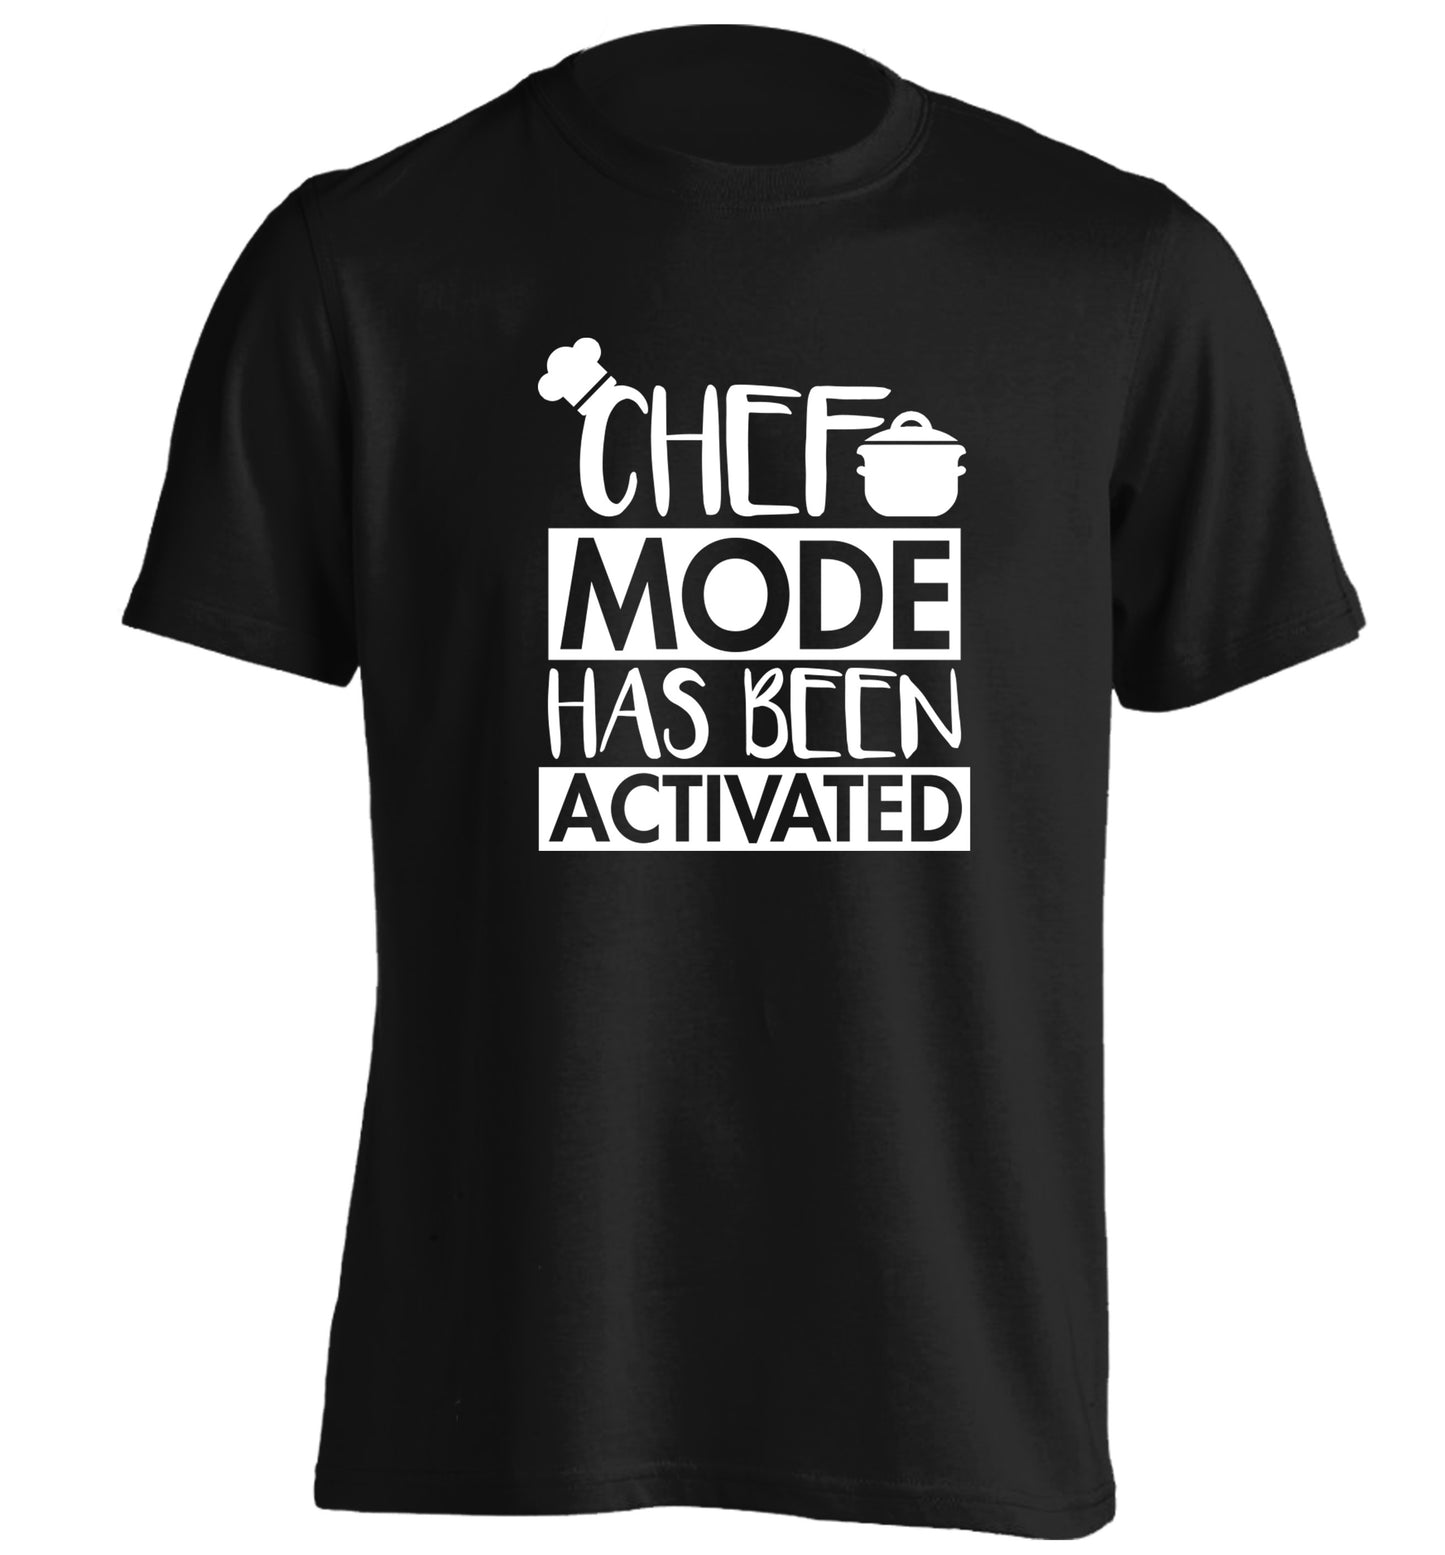 Chef mode has been activated adults unisex black Tshirt 2XL